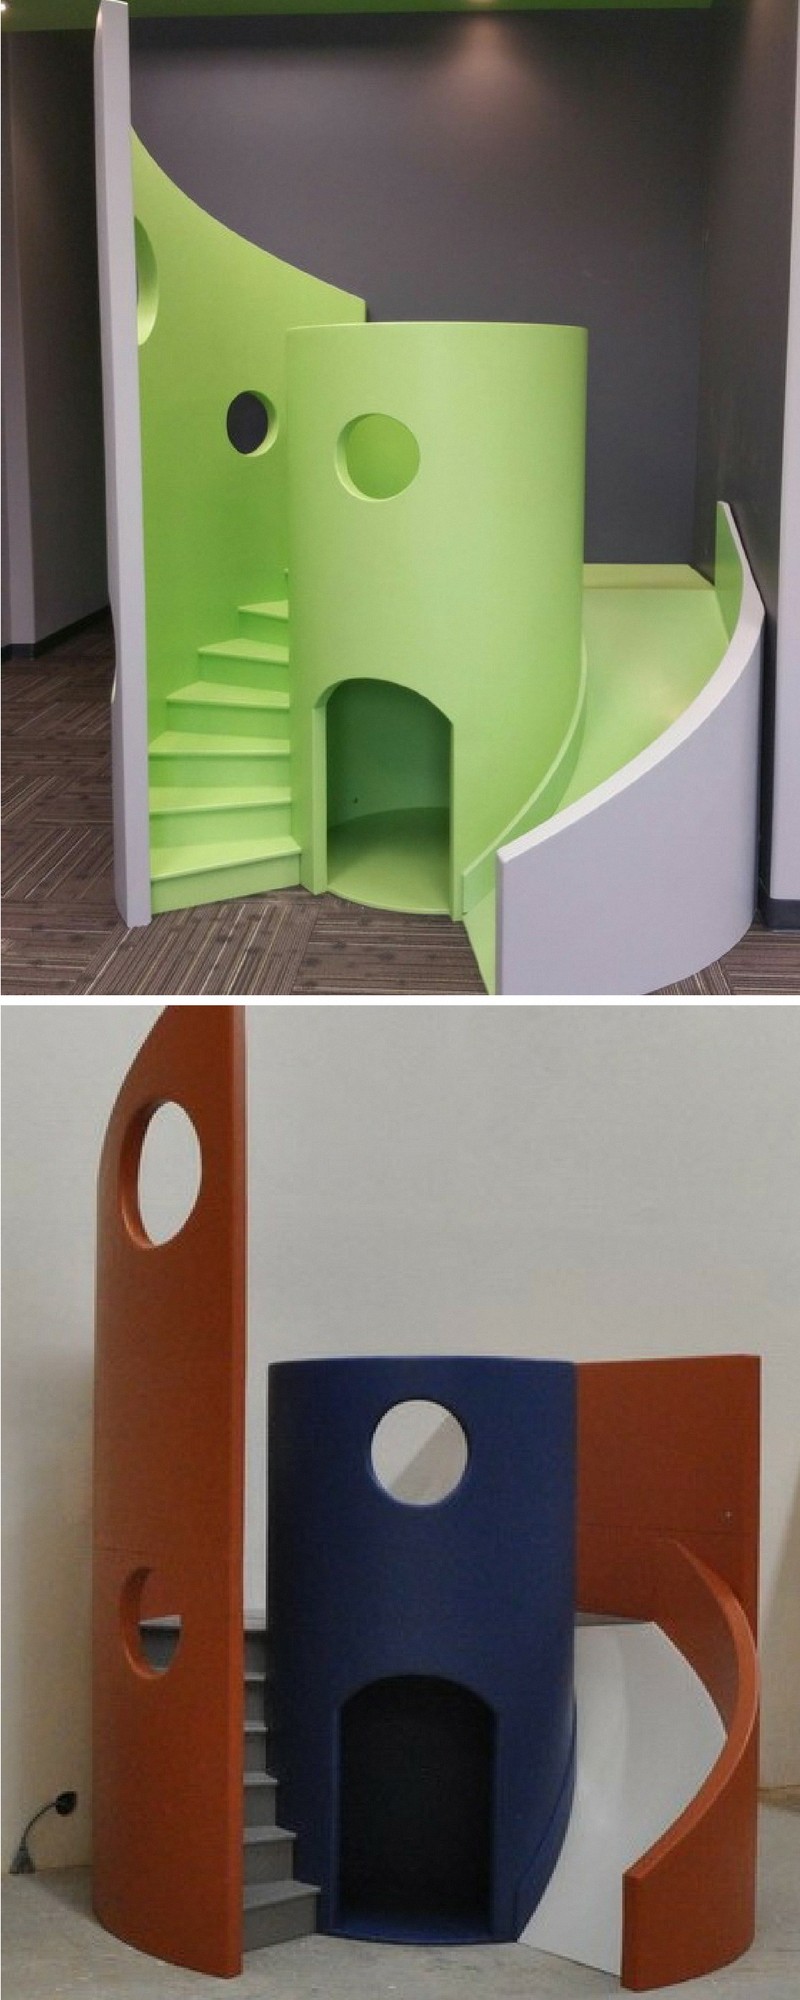 This modern indoor playhouse is a great way to fill